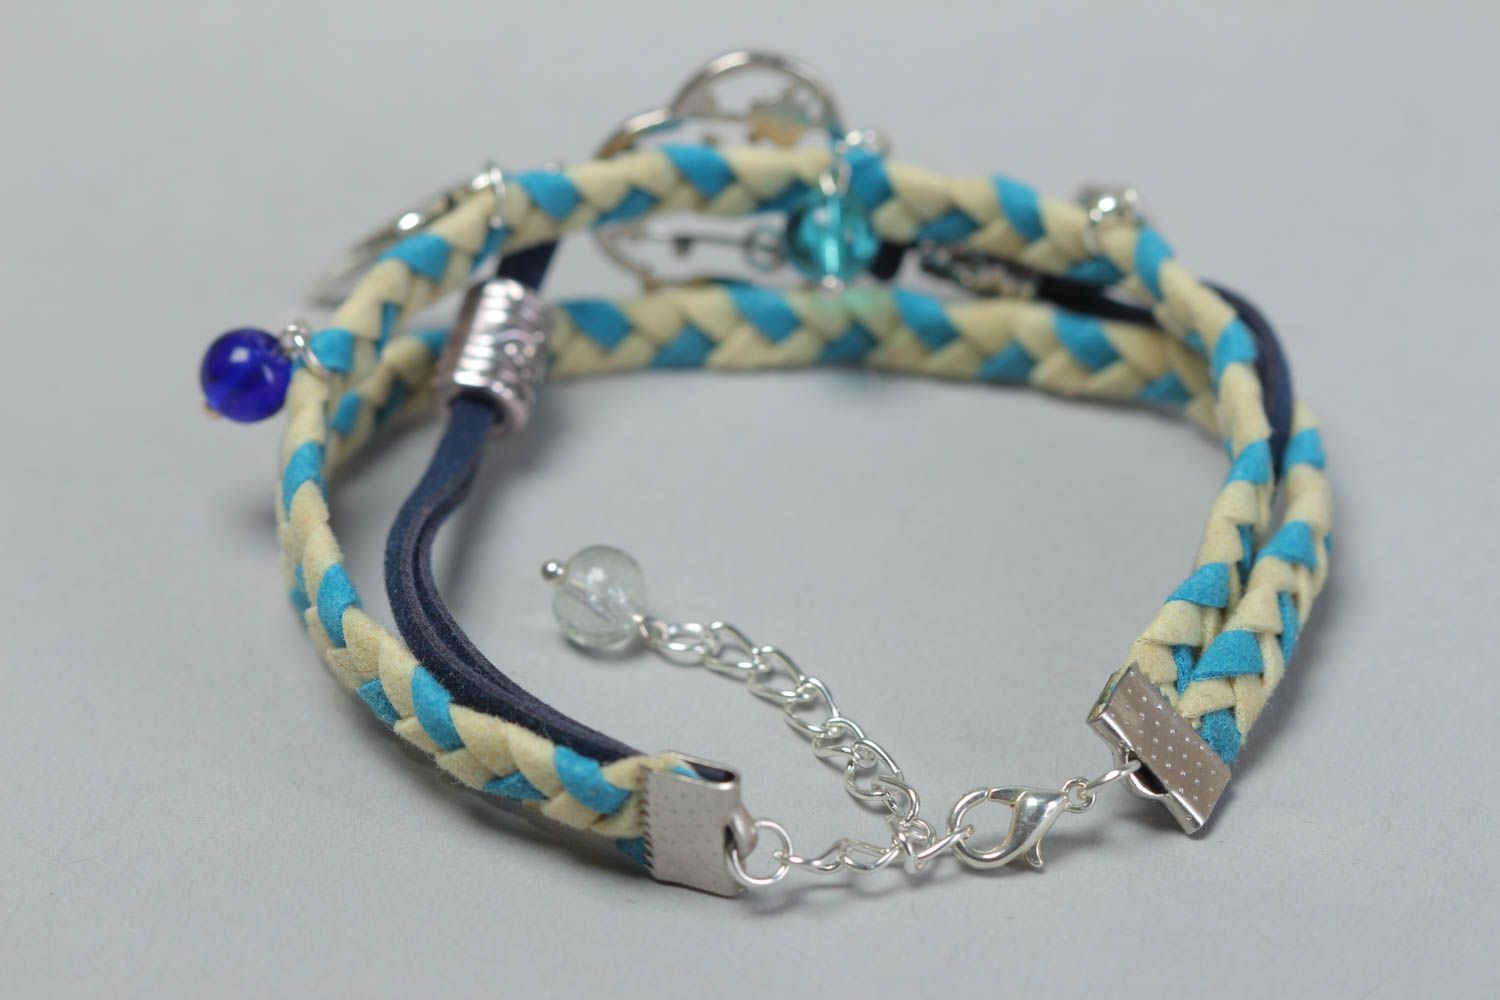 Handmade unusual blue bracelet woven leather accessory jewelry with charms photo 4